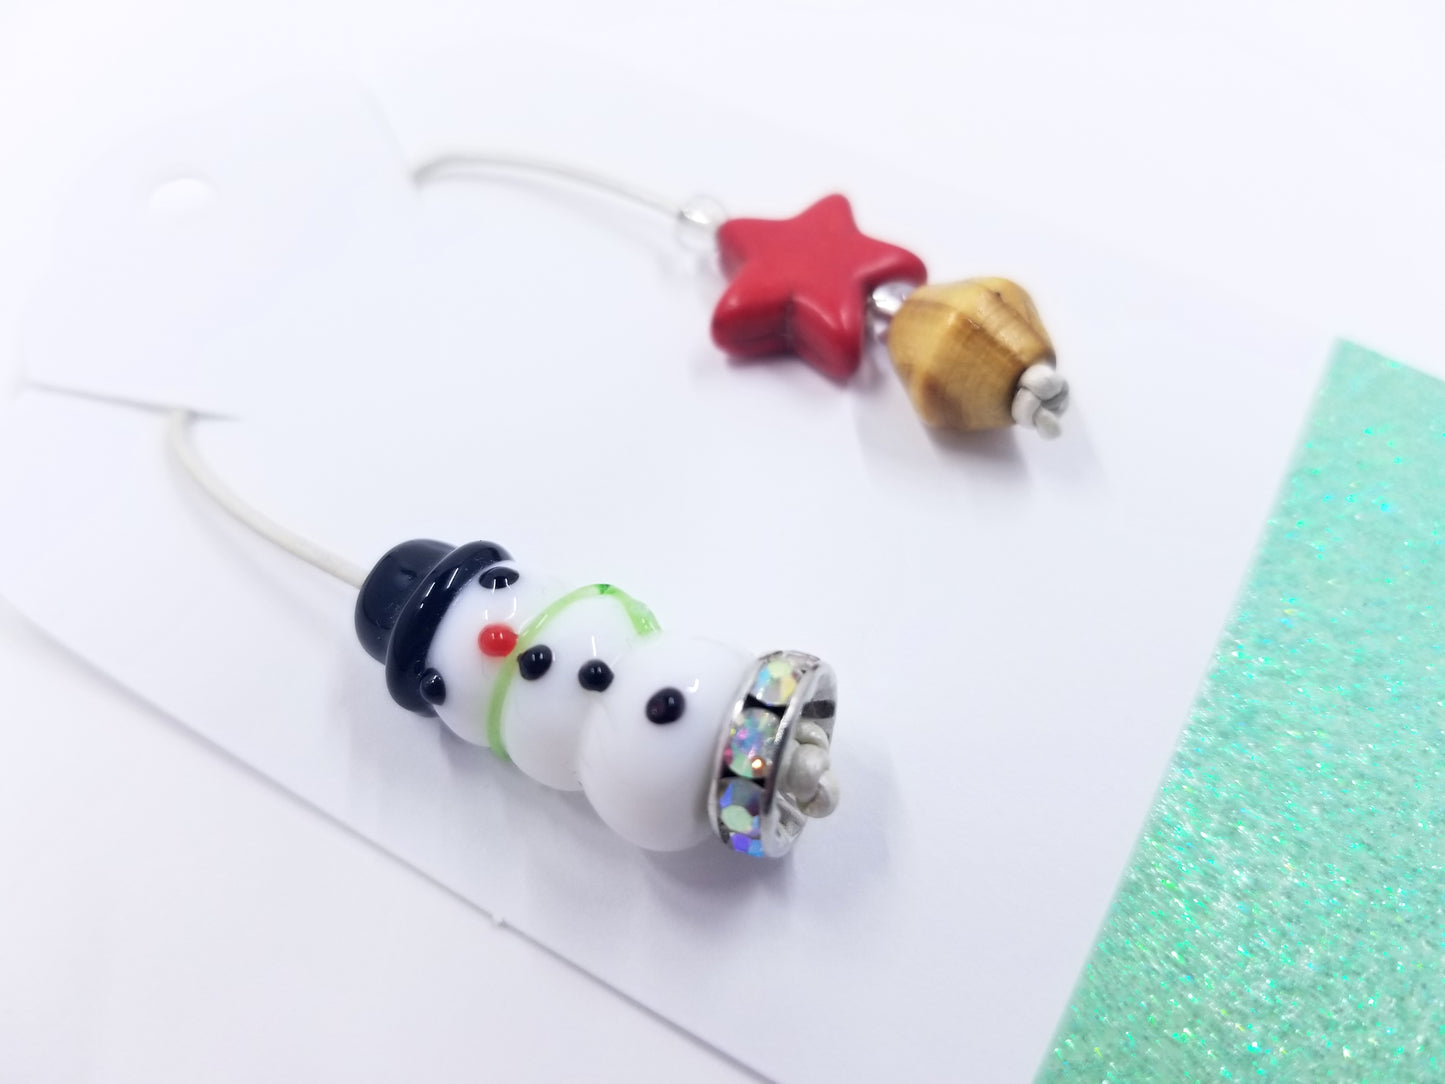 Bookmark for Planner, Bullet Journal, or Traveler Notebook - Snowman and Red Star